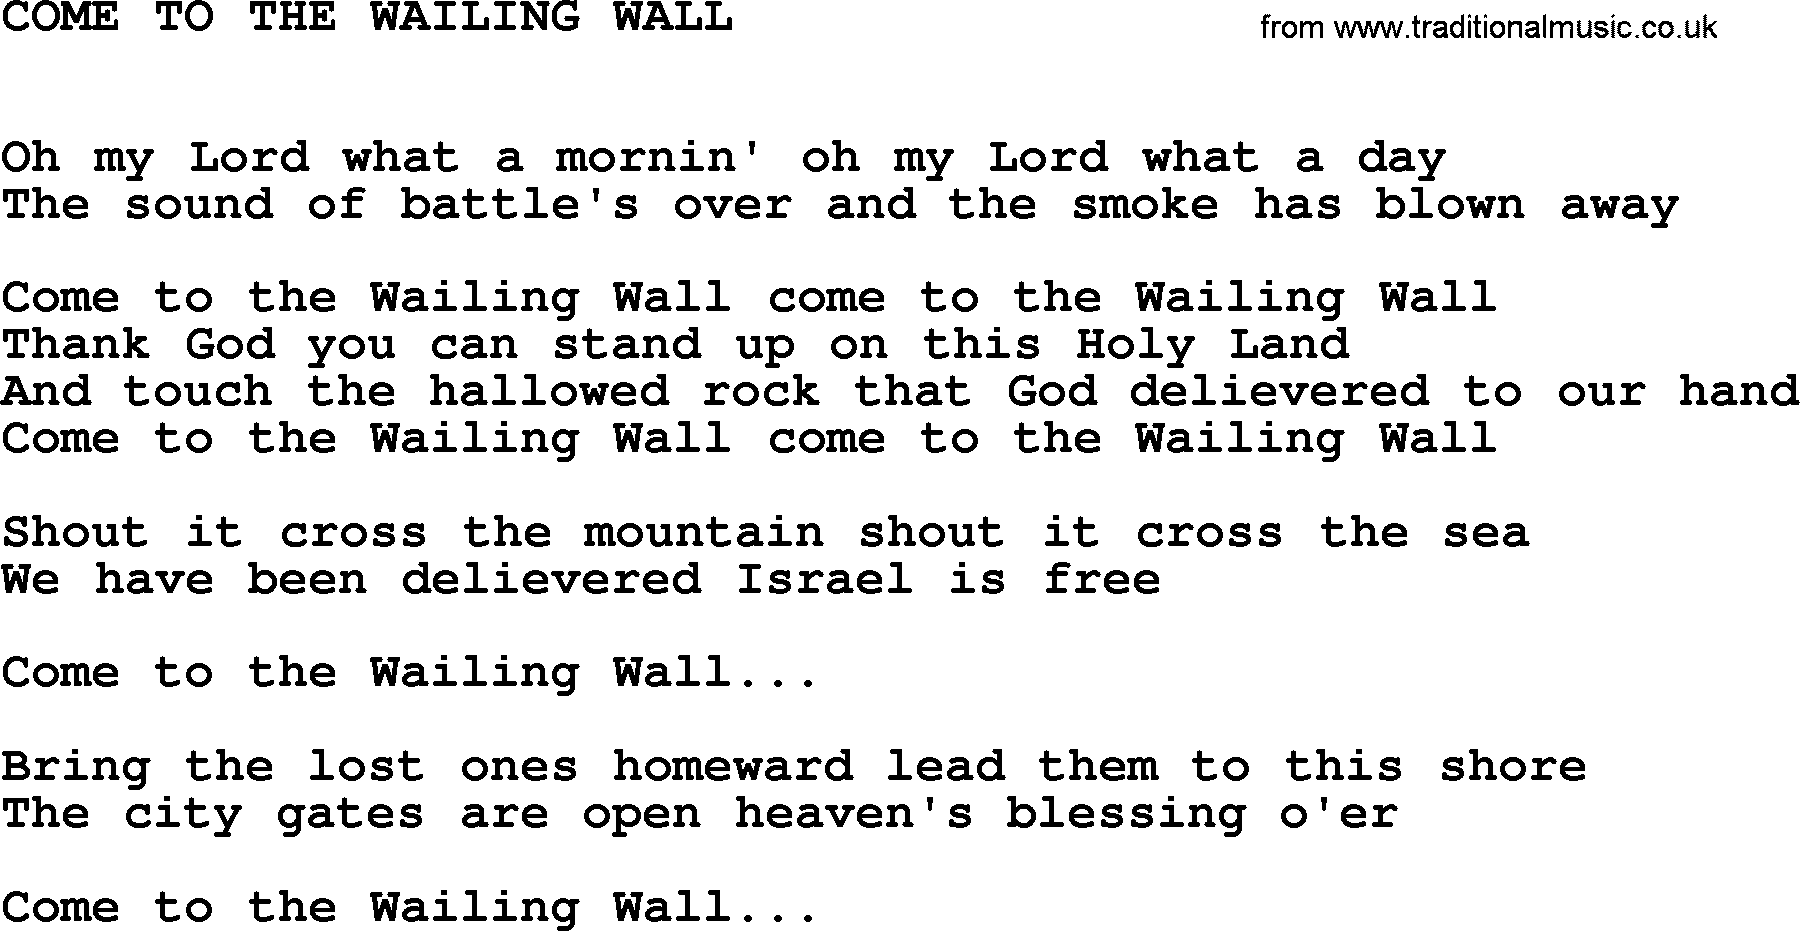 Johnny Cash song Come To The Wailing Wall.txt lyrics